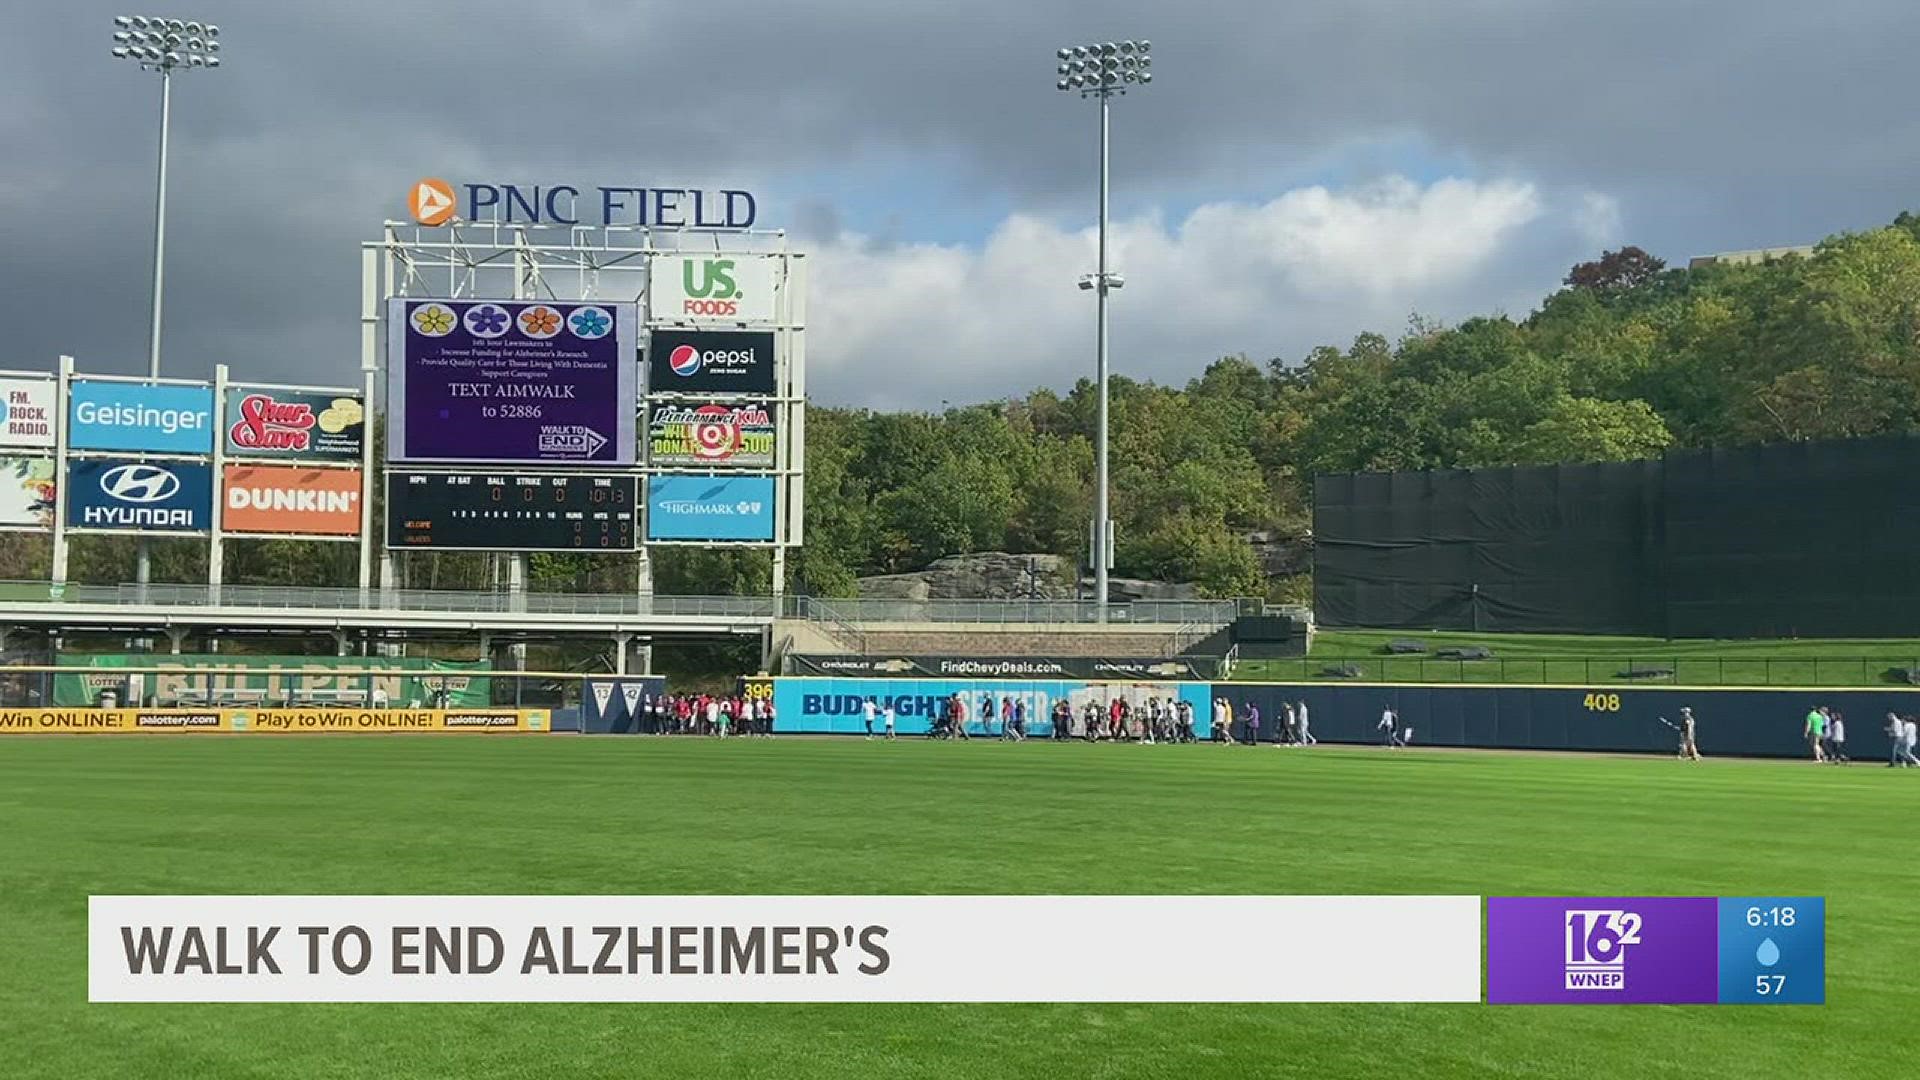 Teams reached their goal of raising more than $100,000 for Alzheimer's research.